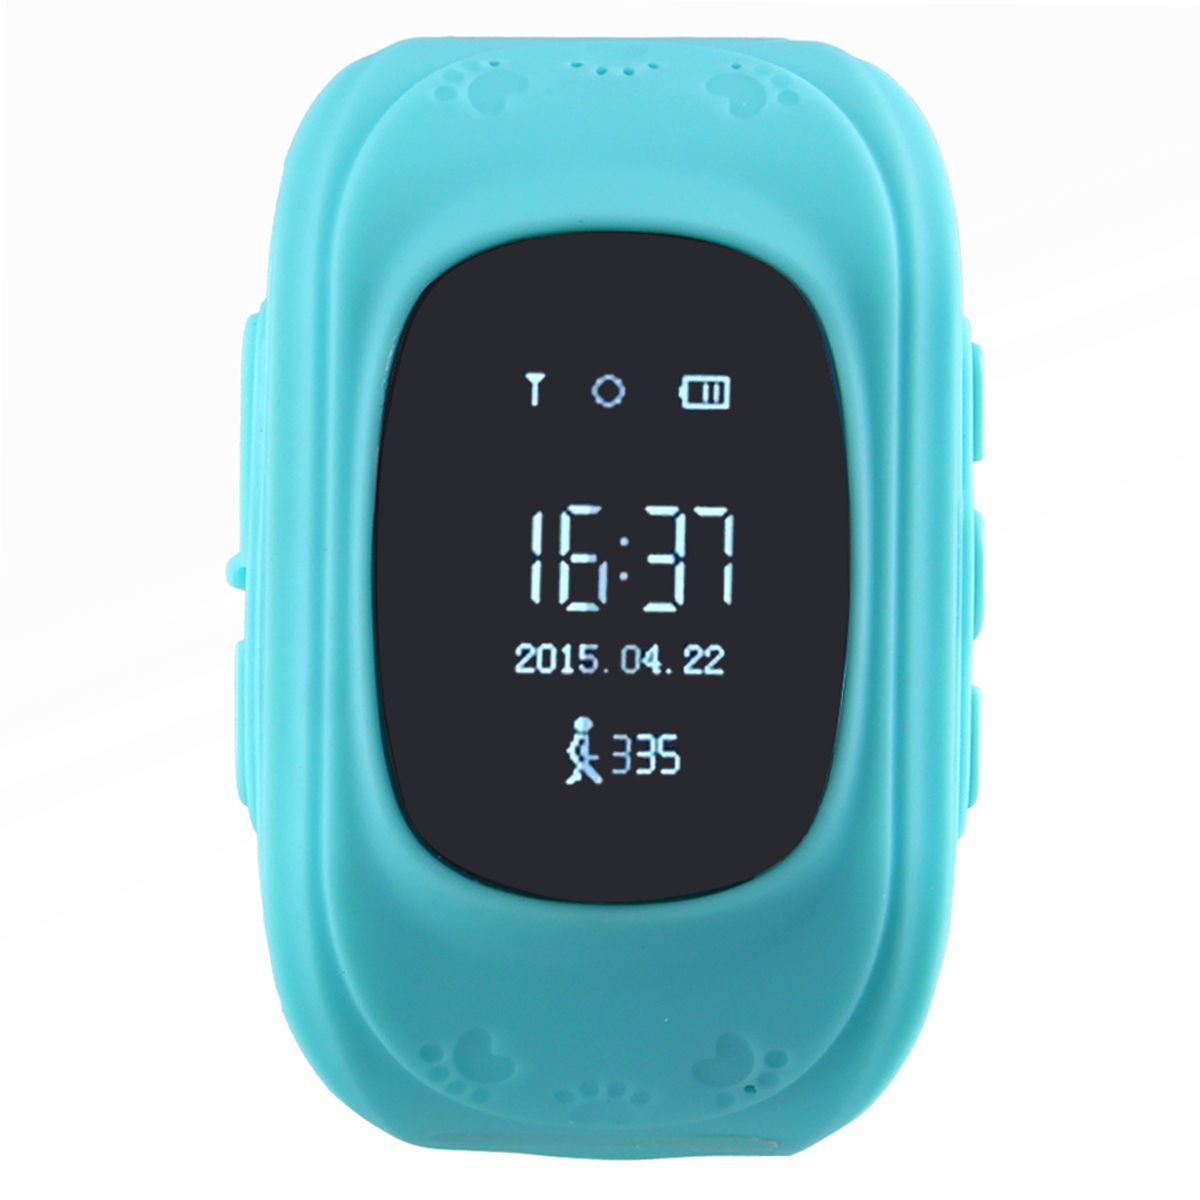 GSM Back to School Gift GPS Tracker Watch with Take Off Alarm 